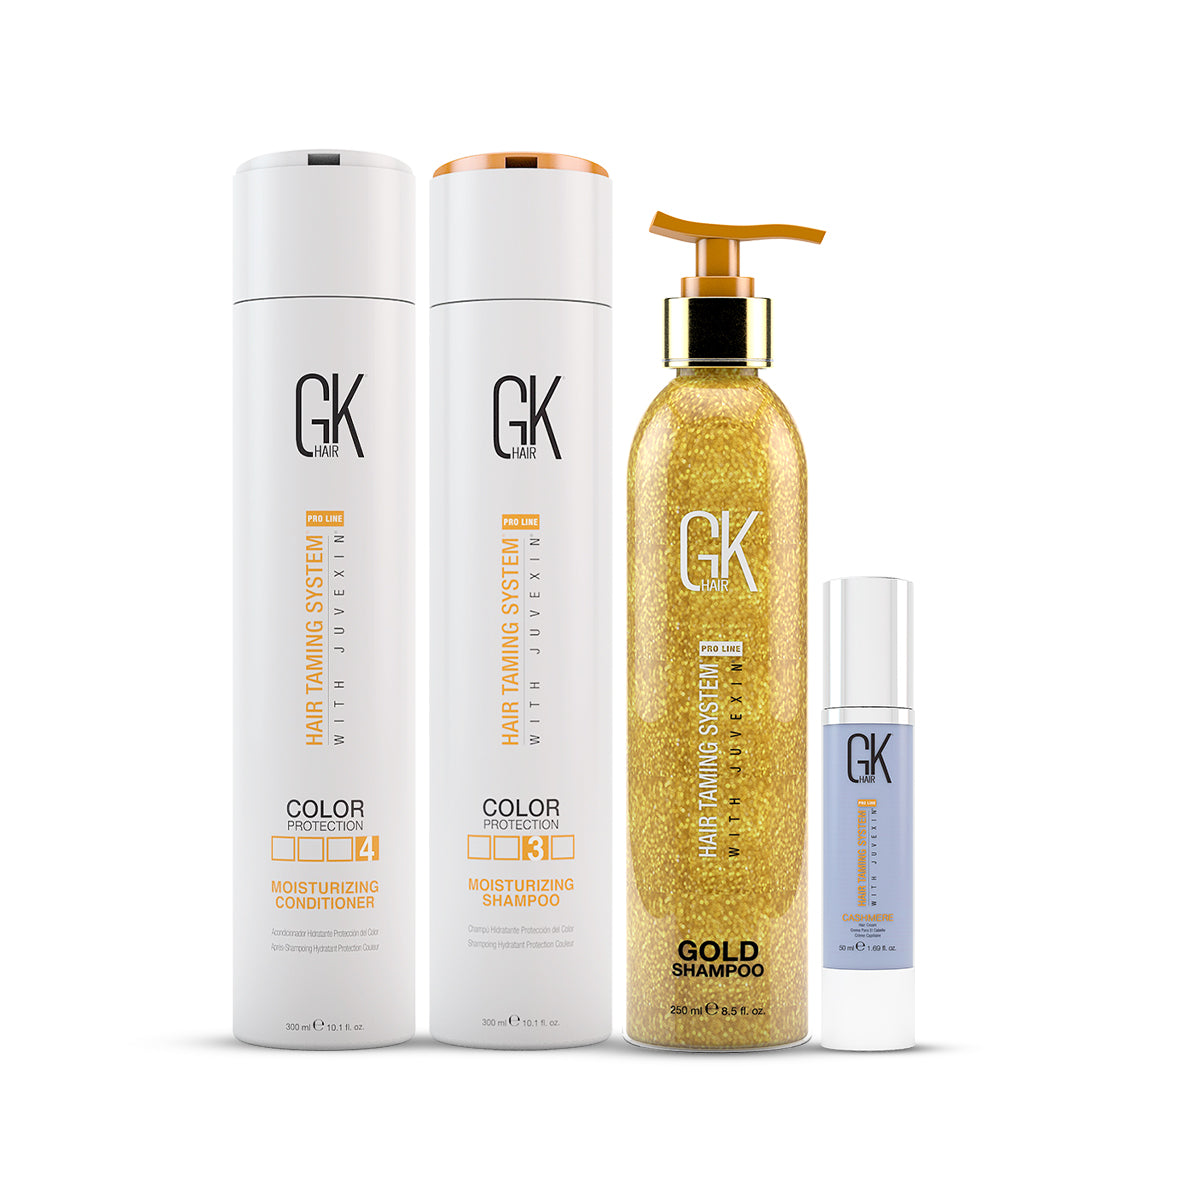 GK Hair Moisturizing Shampoo and Conditioner 300 Ml with Cashmere 50 Ml and Gold Shampoo 250 Ml